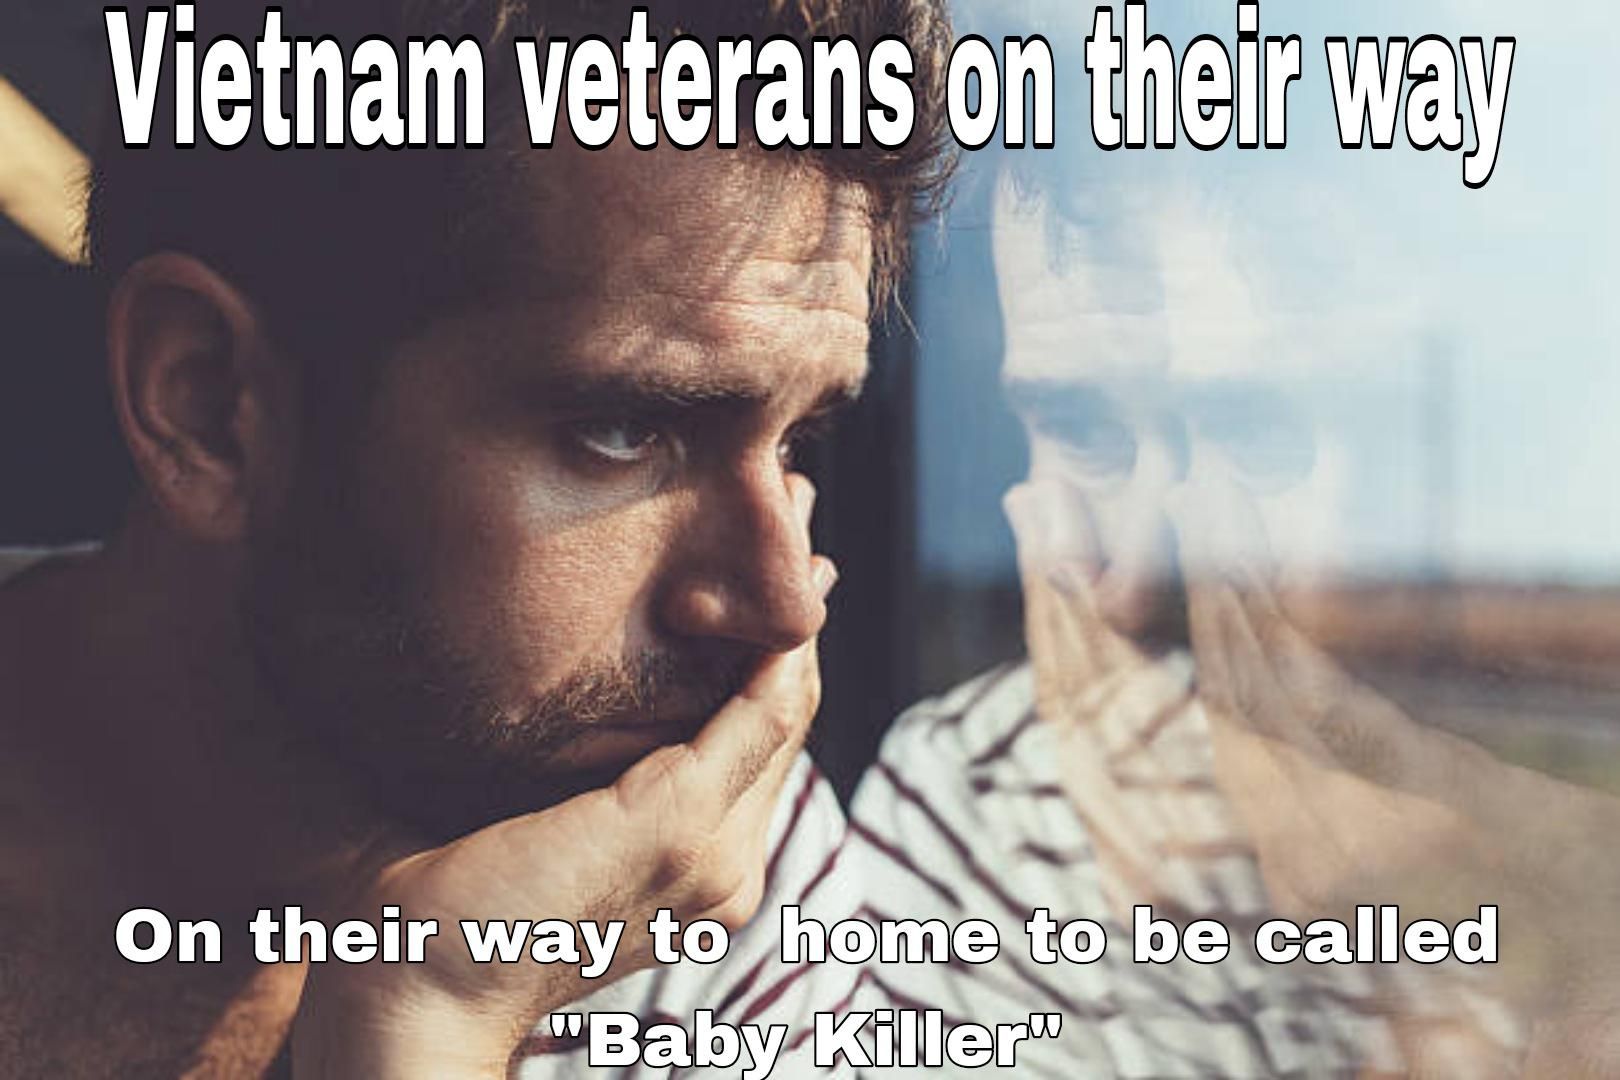 Vietnam veterans are one of the least respected groups of veterans by the public and government